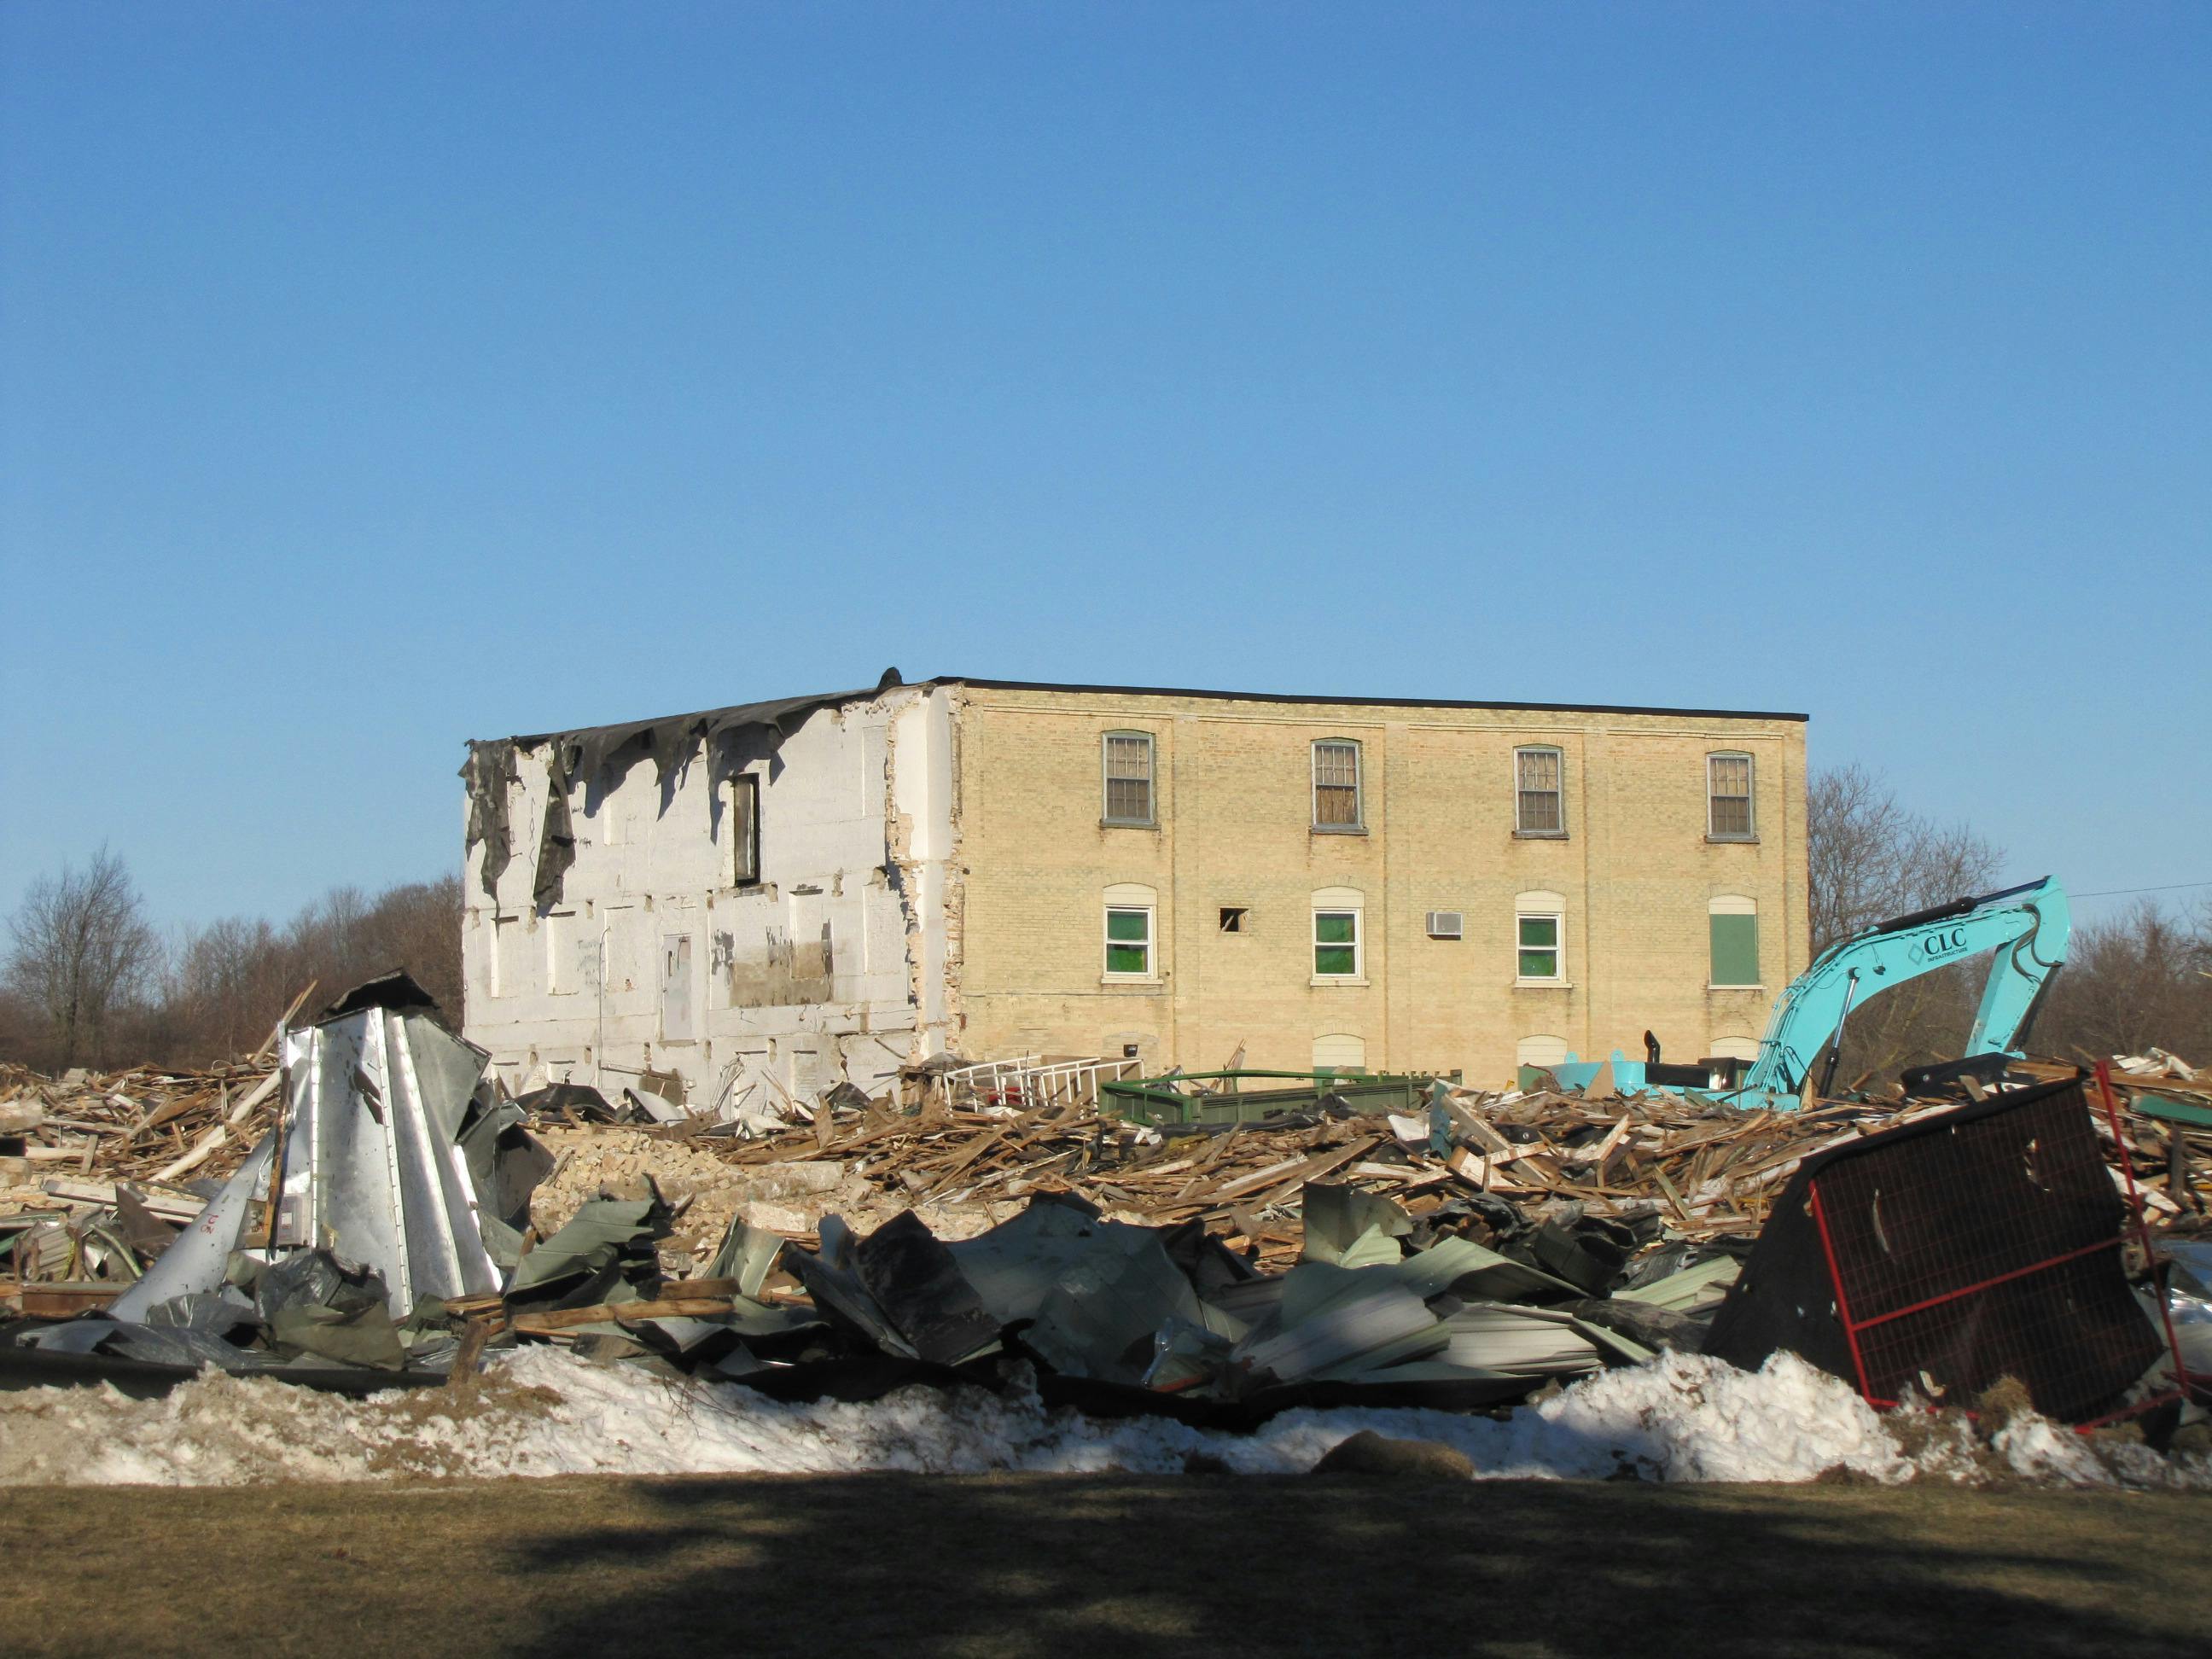 Demolition of Bogdon and Gross - March 15, 2021